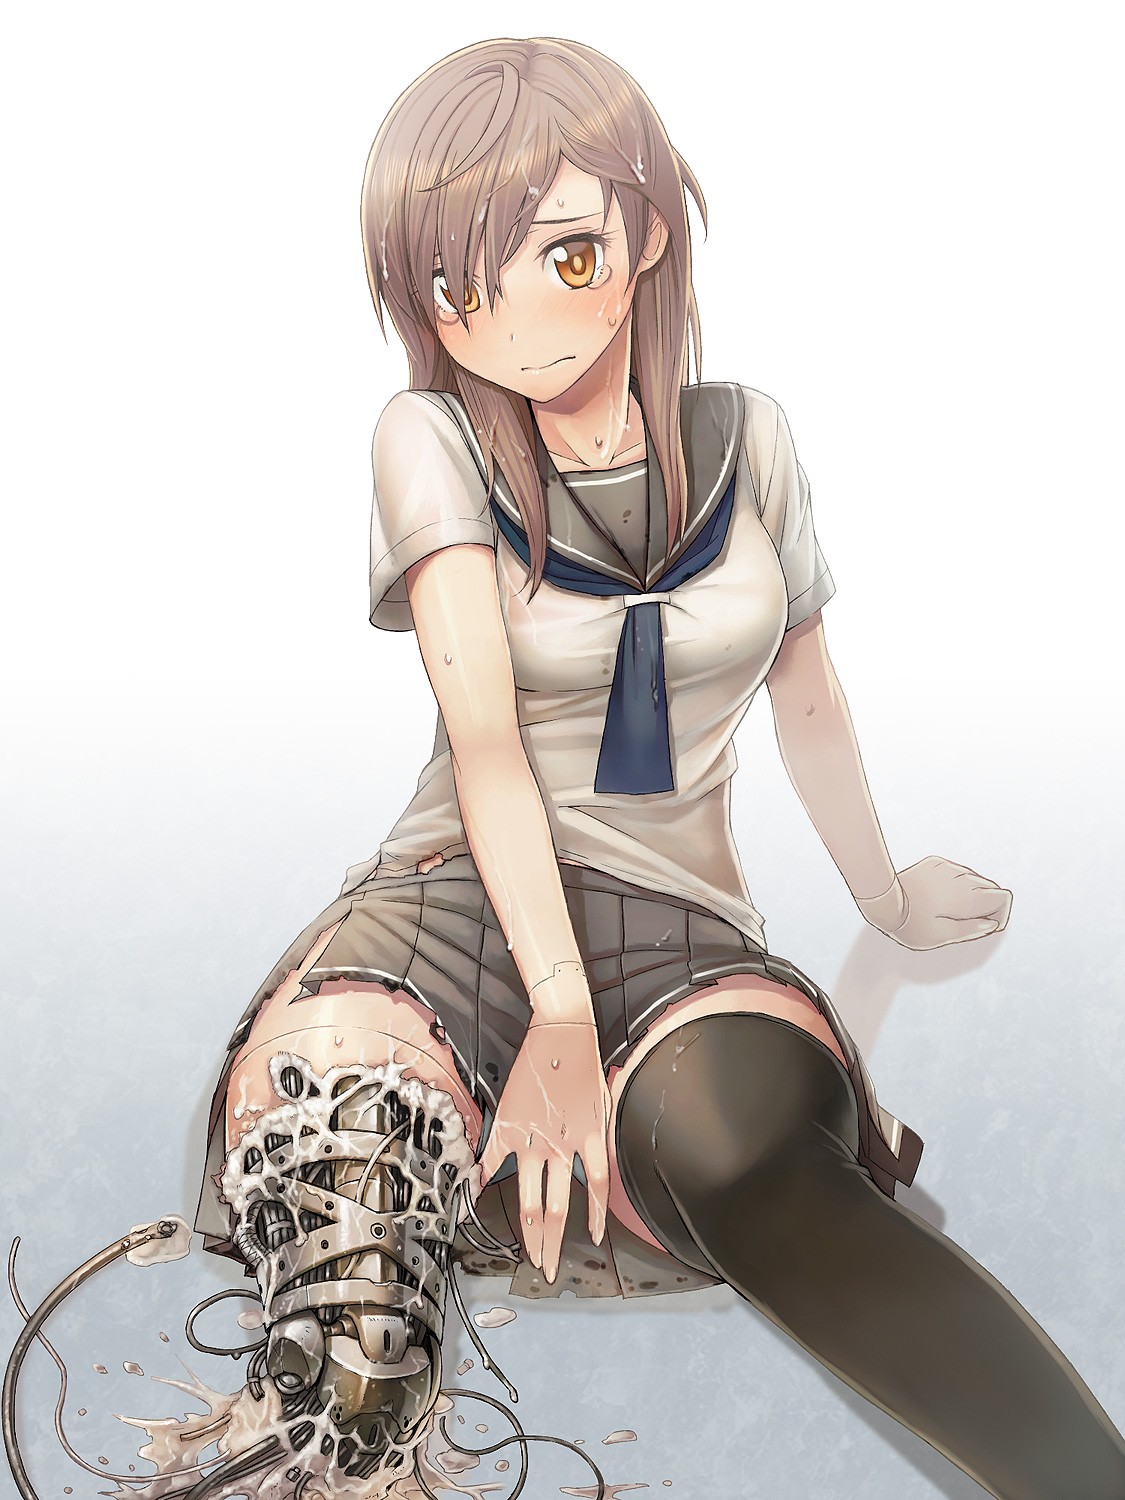 Anime 1125x1500 anime girls long hair school uniform androids cyborg thighs black stockings big boobs JK embarrassed wet body wet clothing white panties simple background 2D original characters brown eyes brunette looking at viewer zettai ryouiki machine futuristic painful Pixiv anime